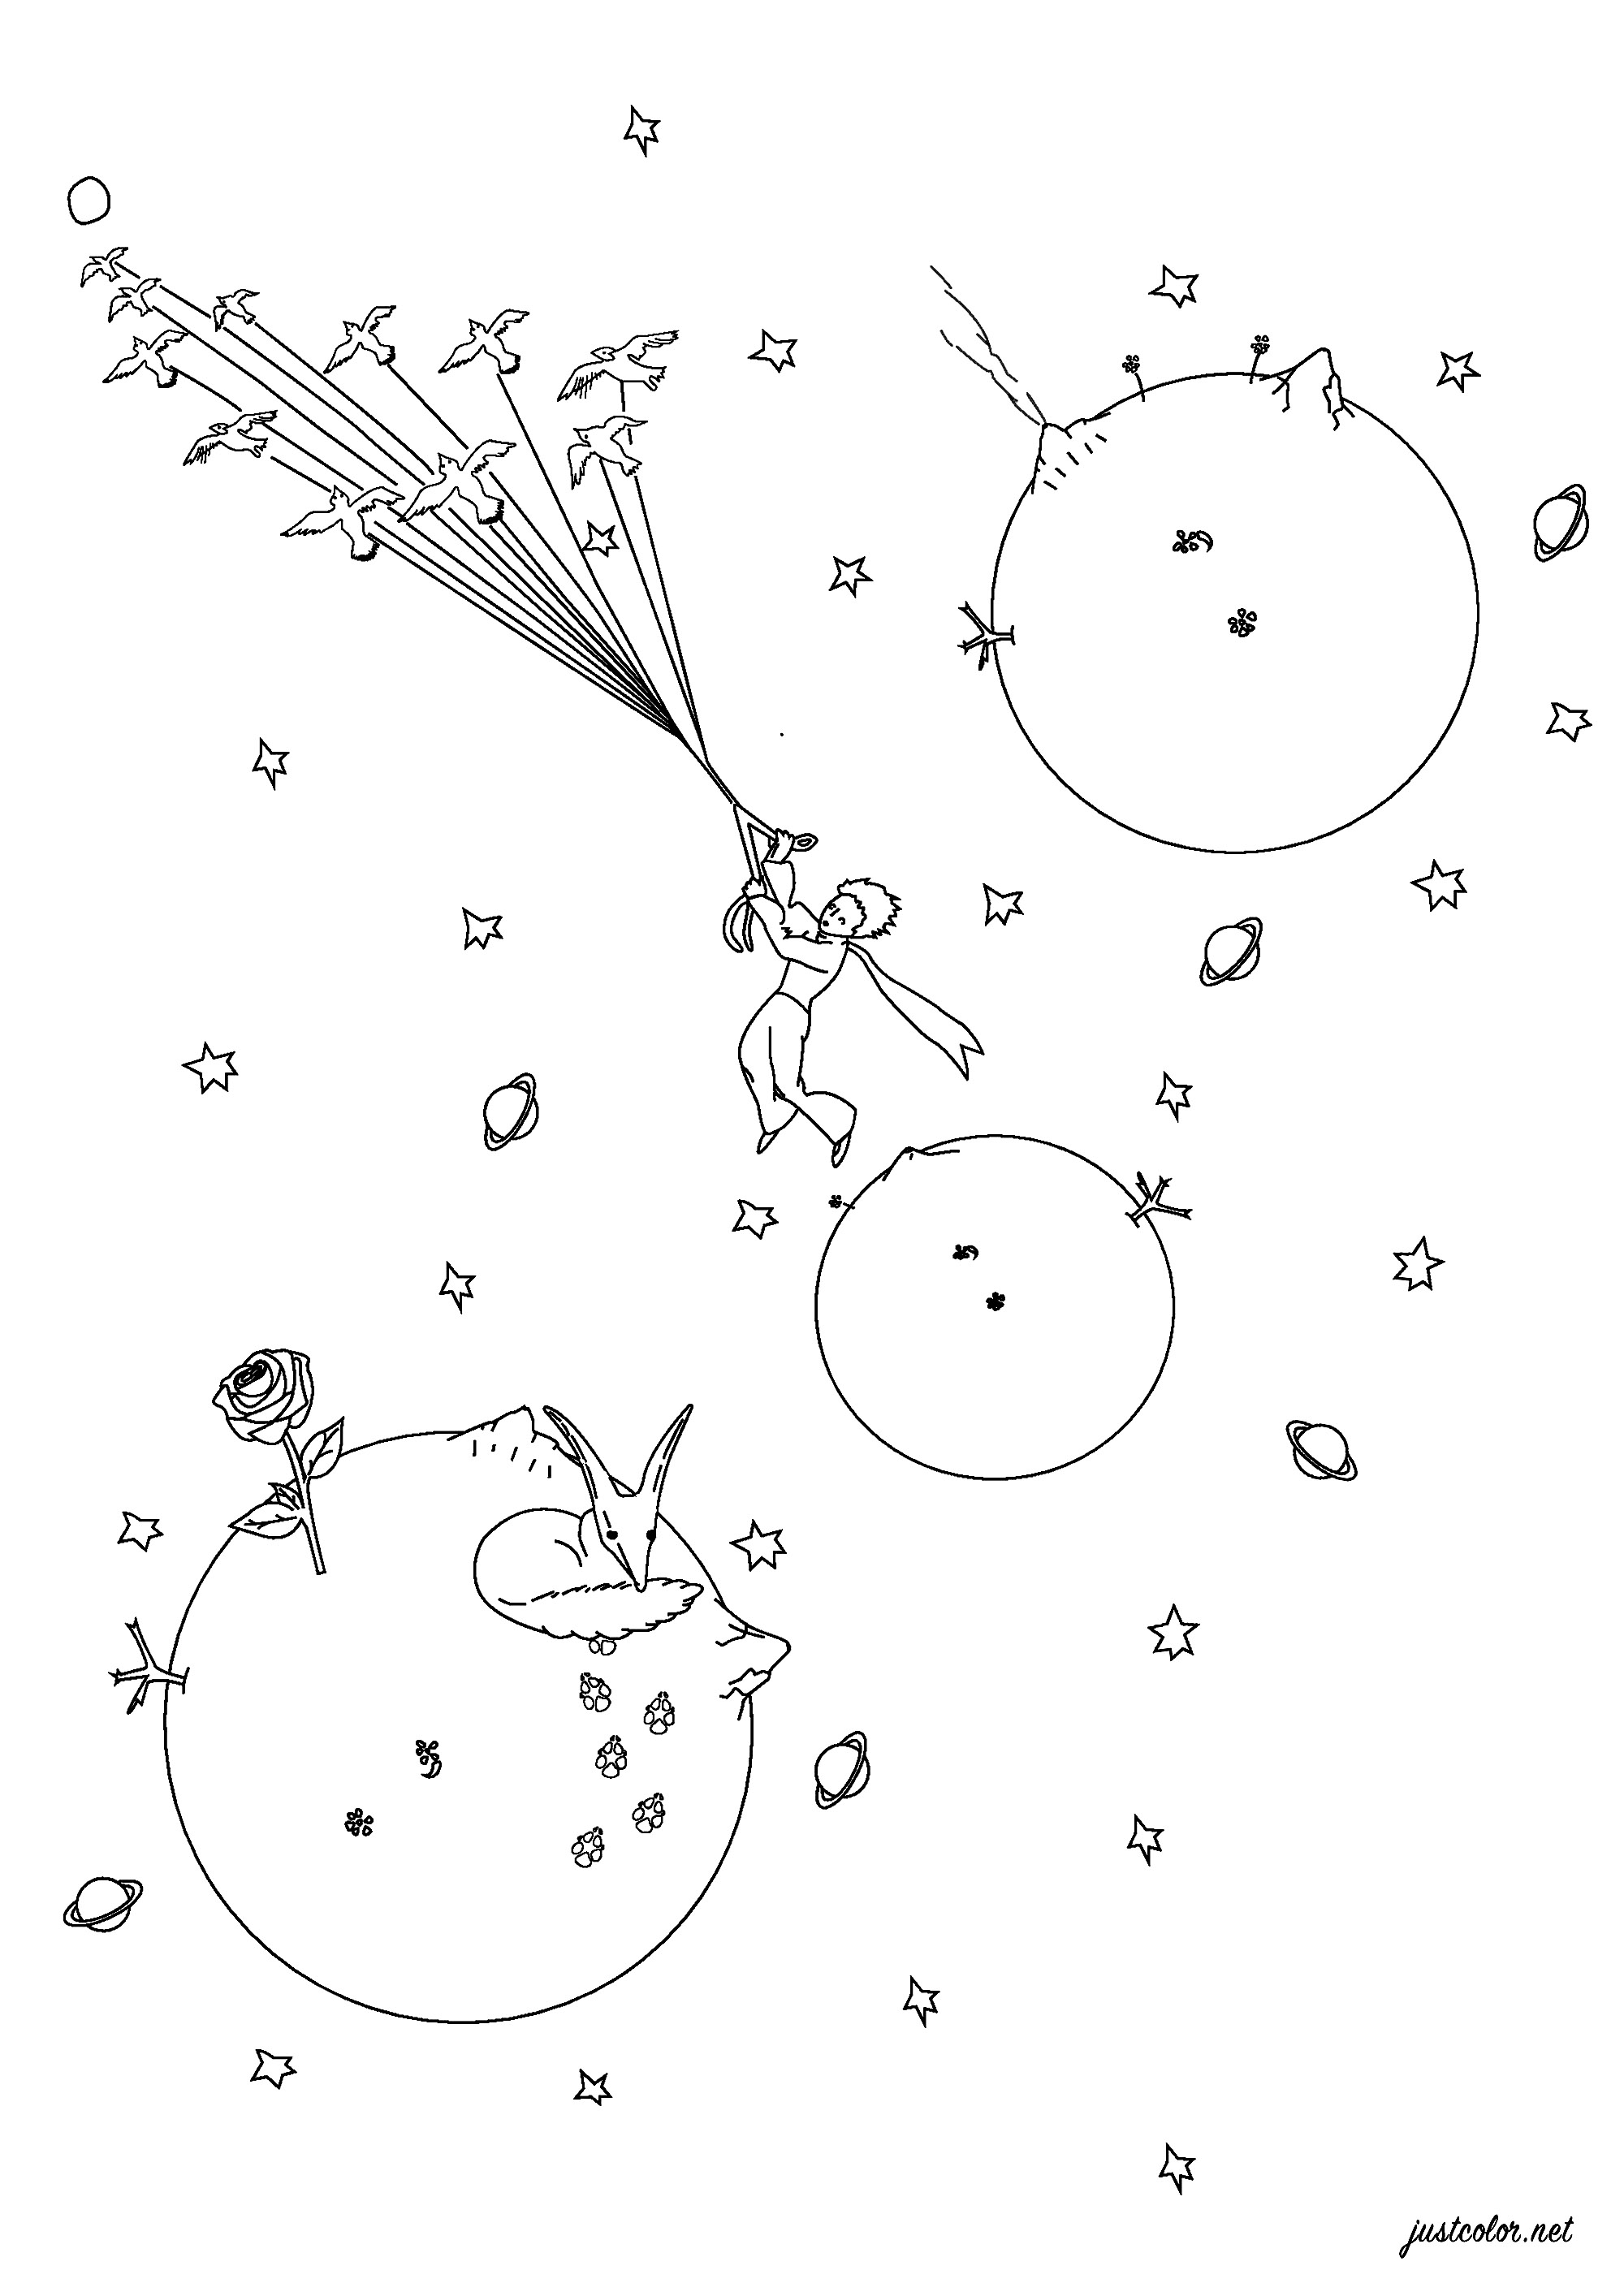 Coloring page inspired by The Little Prince by Antoine de Saint-Exupéry. First published in 1943, The Little Prince is a poetic tale, with watercolor illustrations by the author, in which a pilot stranded in the desert meets a young prince visiting Earth from a tiny asteroid.